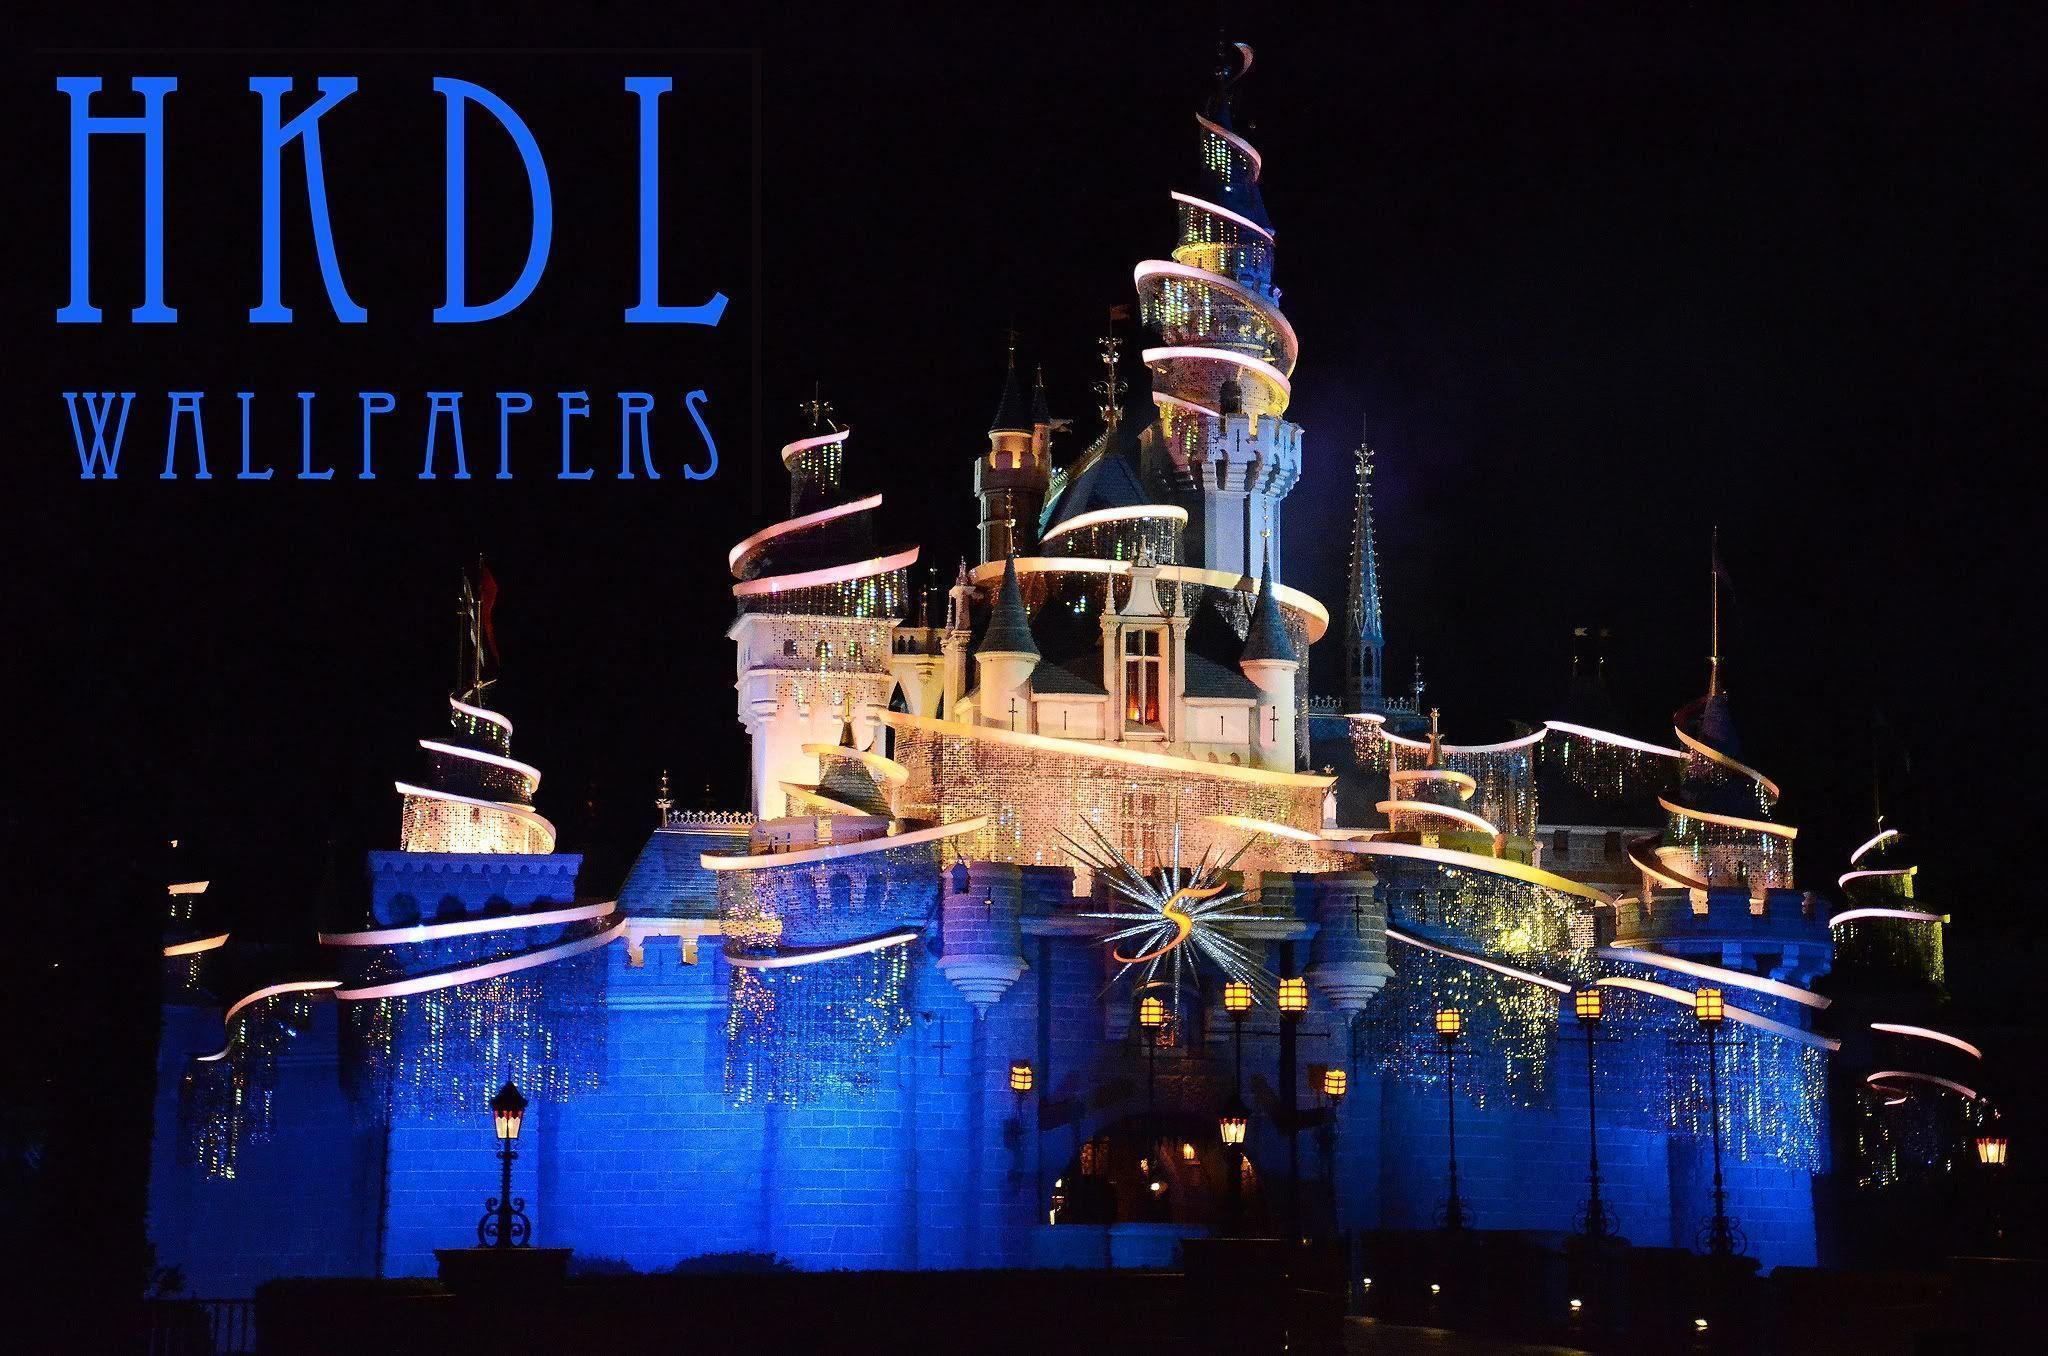 HKDL Wallpaper HD App for iPhone, iPad or iPod Touch!